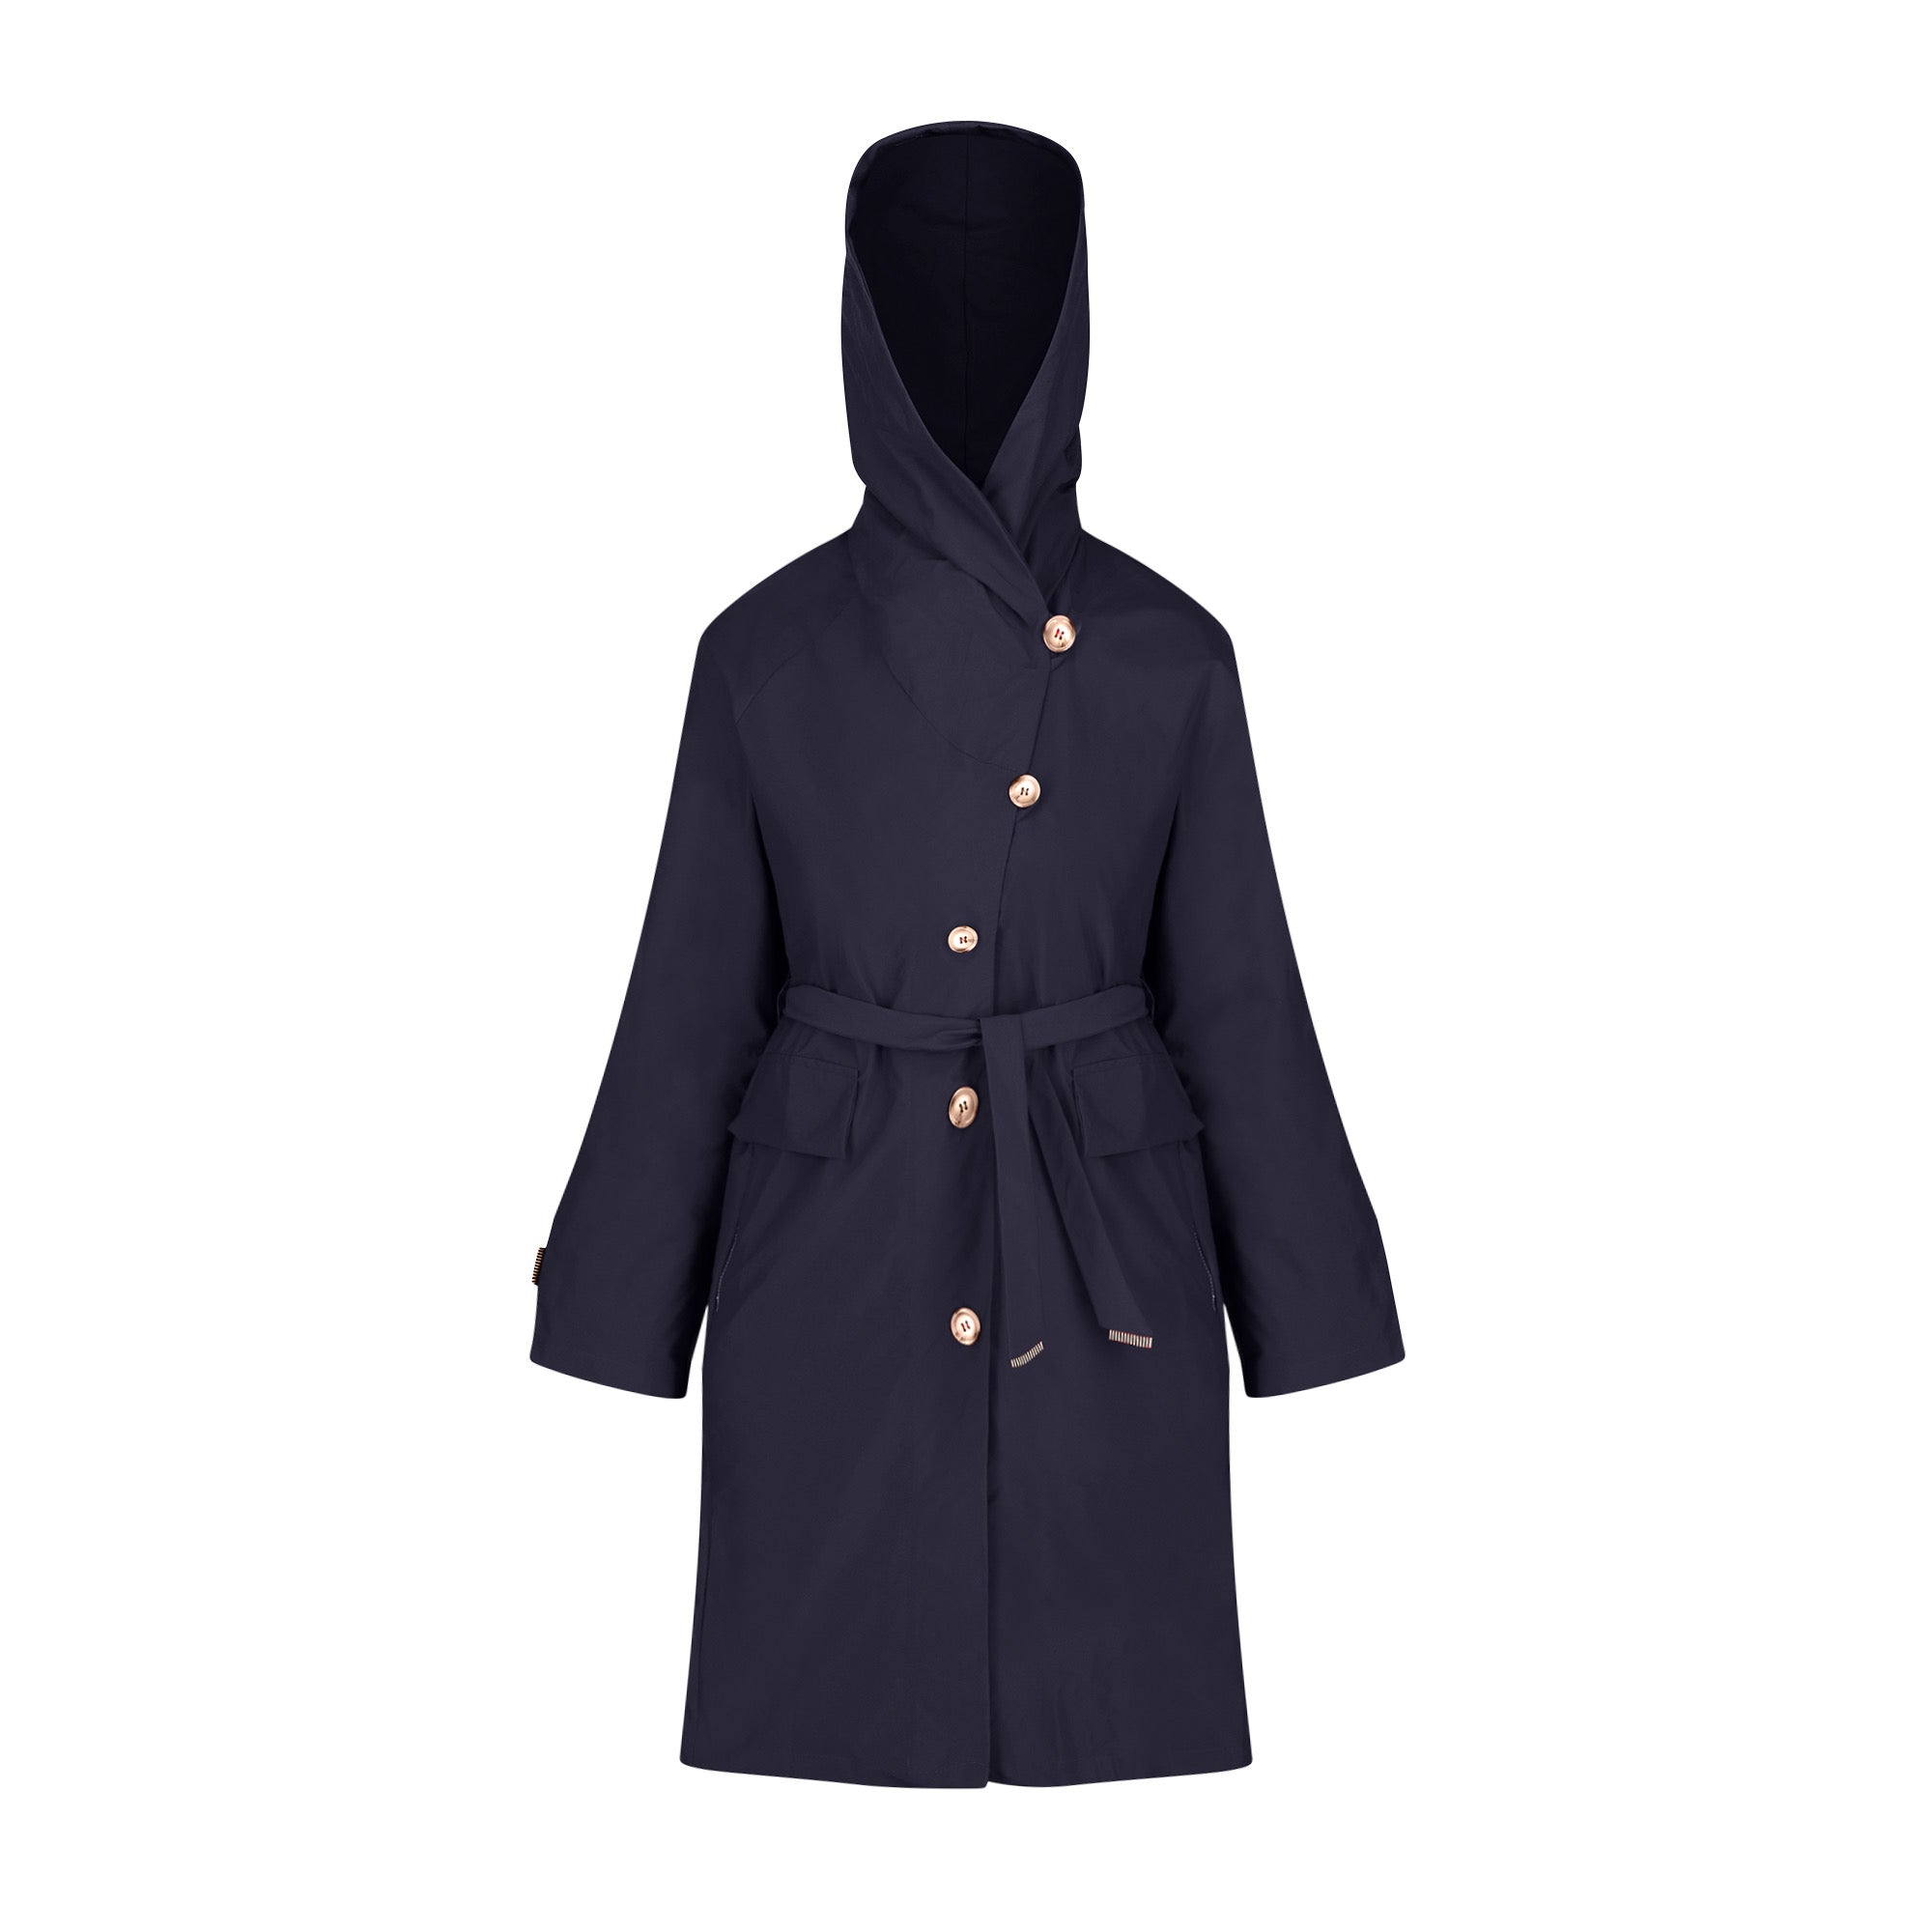 Mistral raincoat - Blue Night color - front view